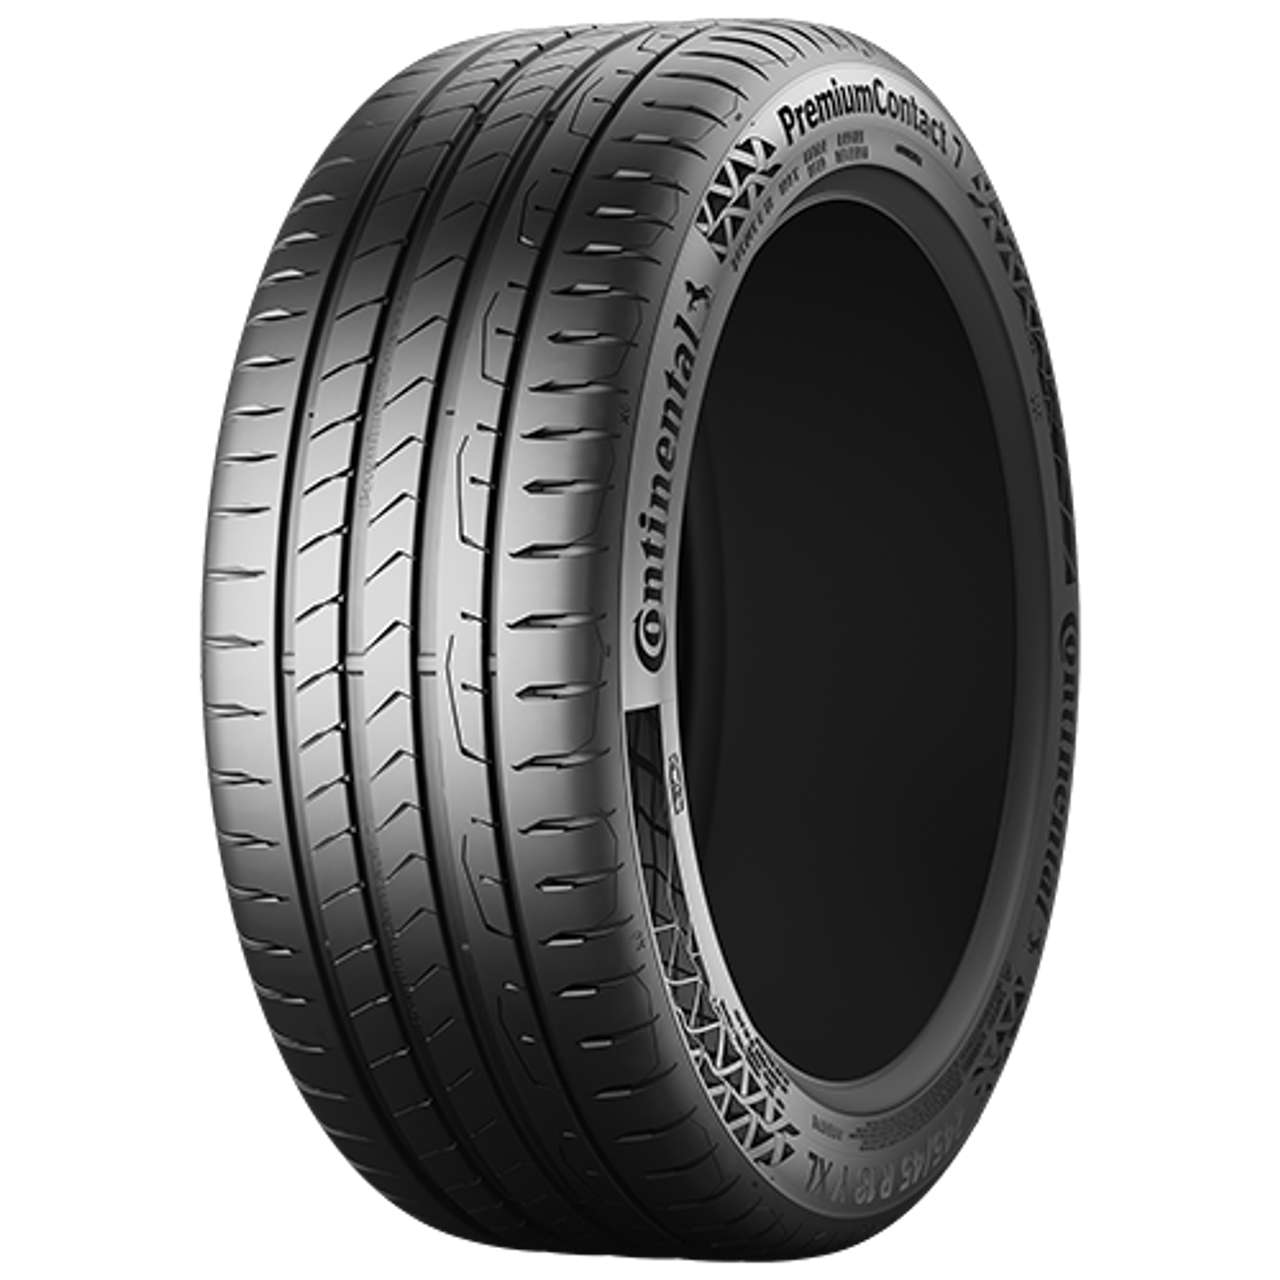 CONTINENTAL PREMIUMCONTACT 7 (EVc) 225/50R17 98Y FR BSW